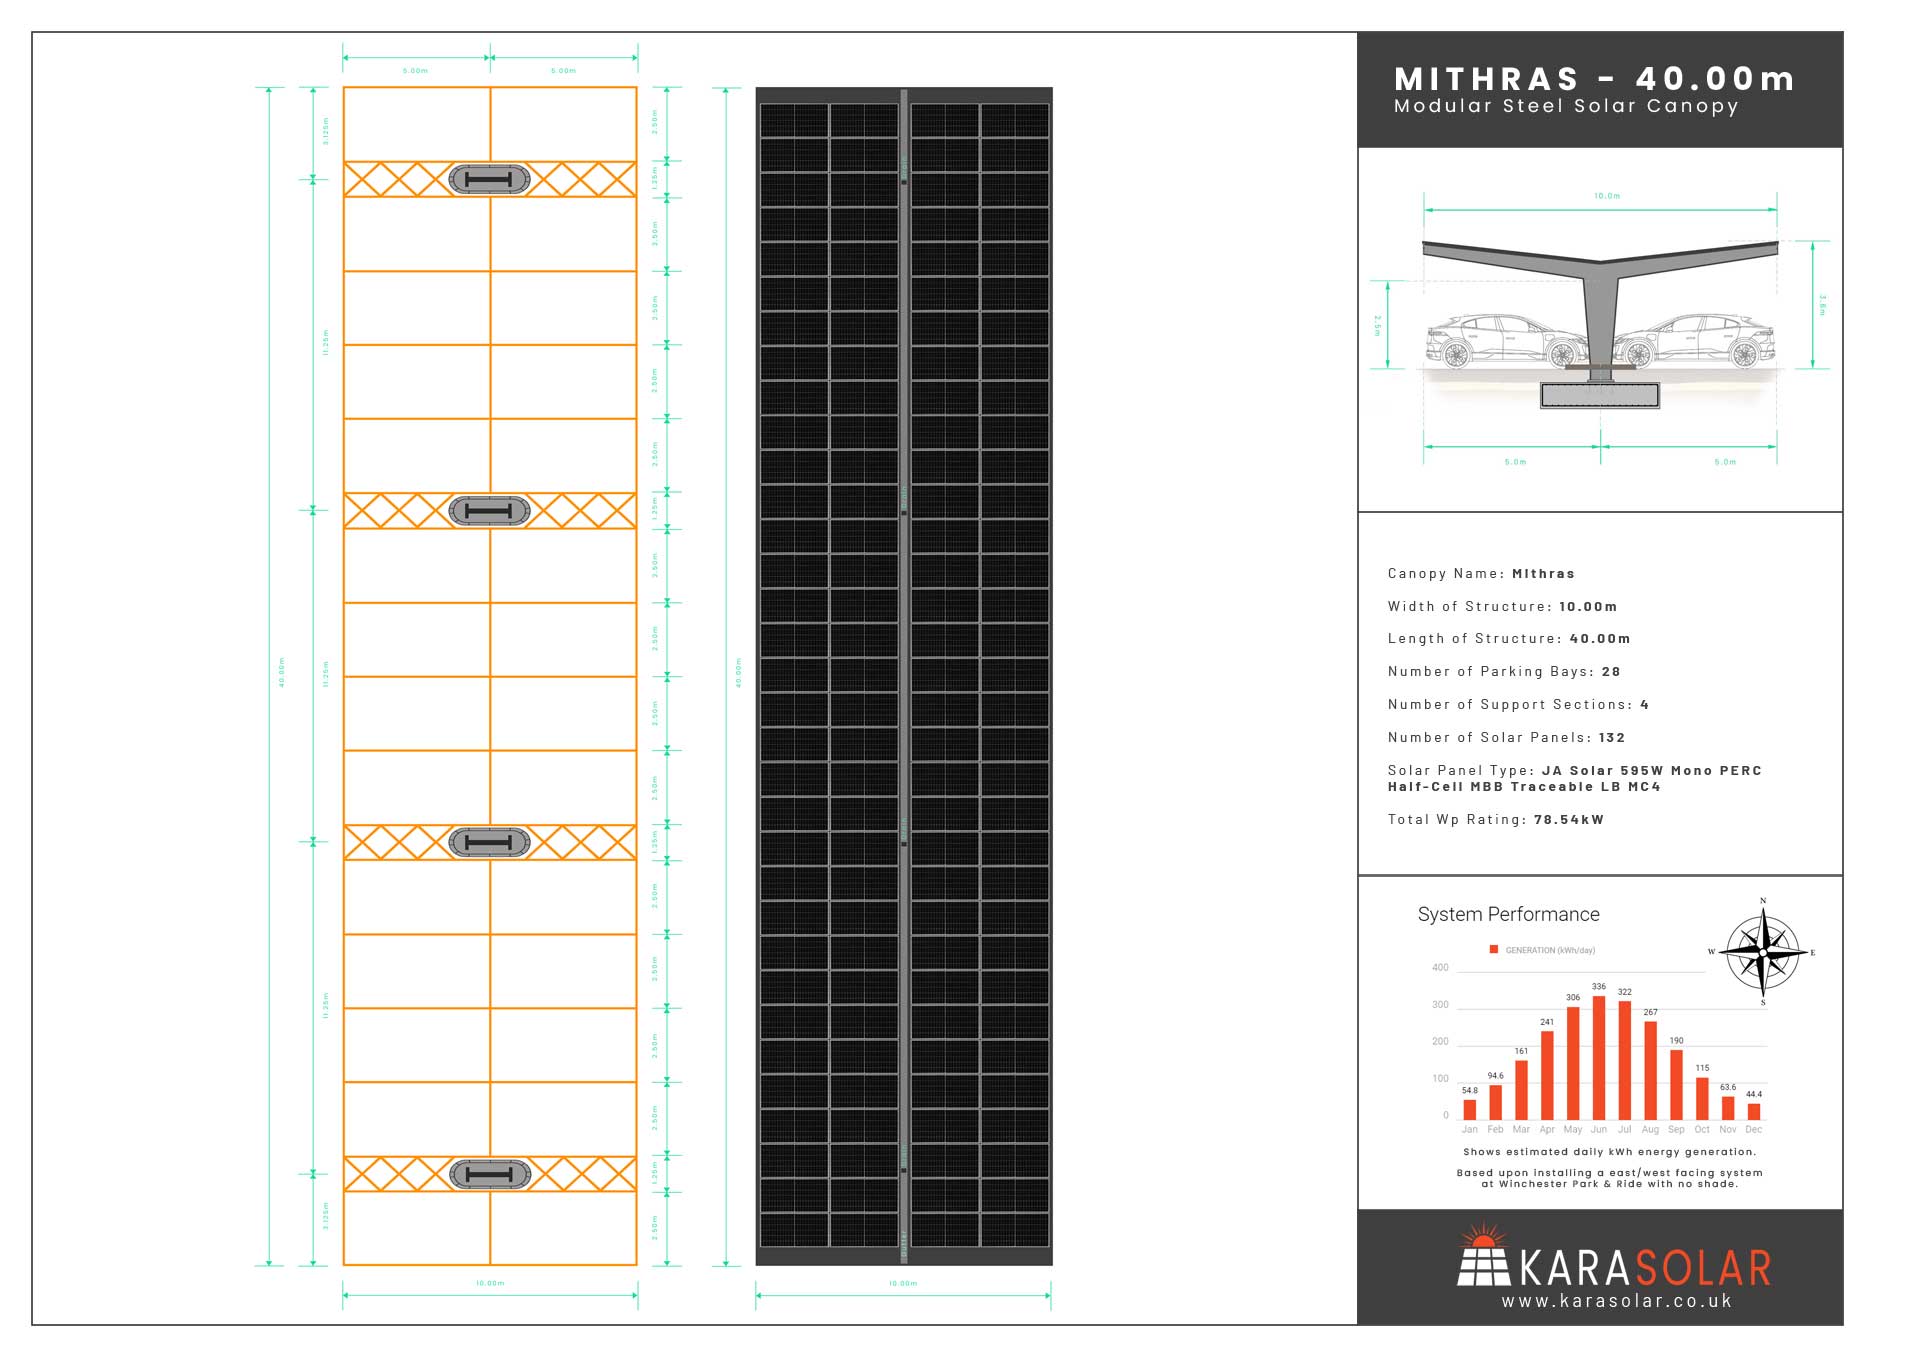 Mithras-Steel-Solar-Canopy-Parking-Layout-40.00m-Doc